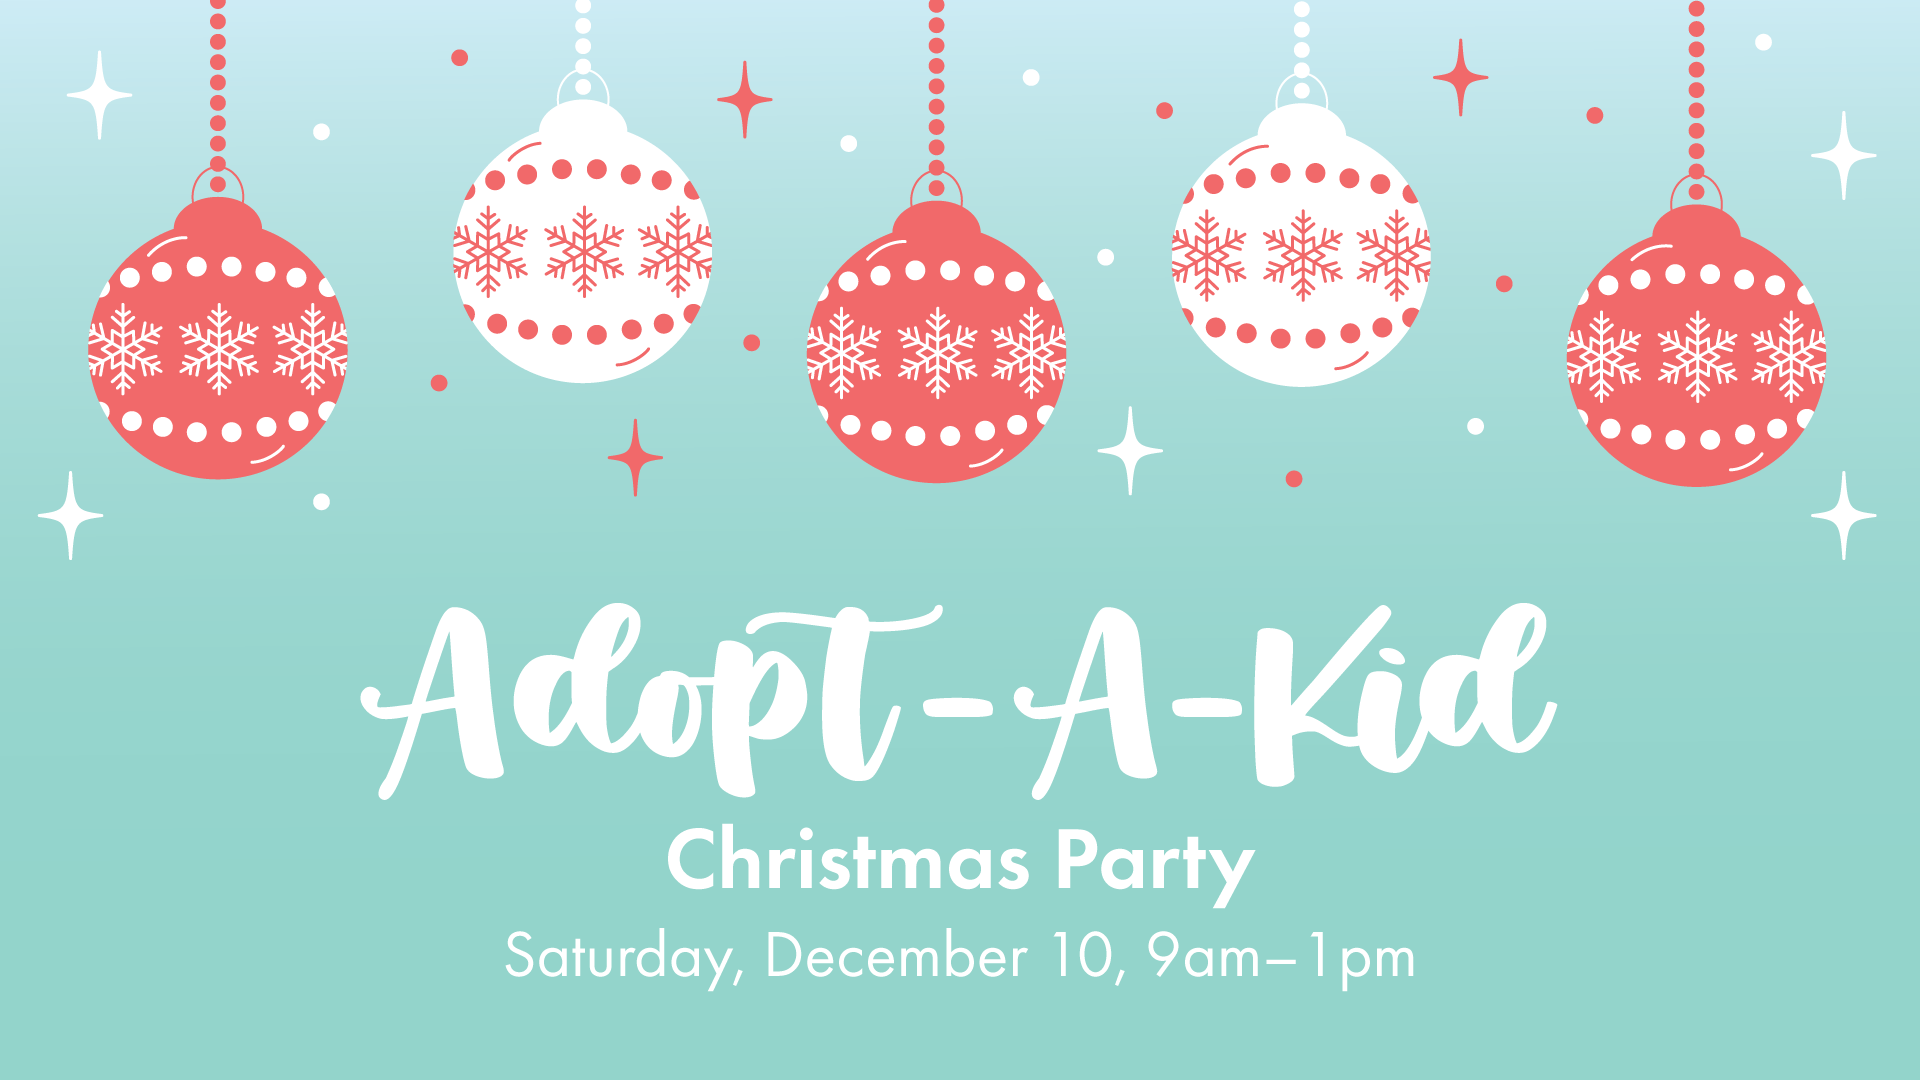 Adopt-A-Kid Christmas Party